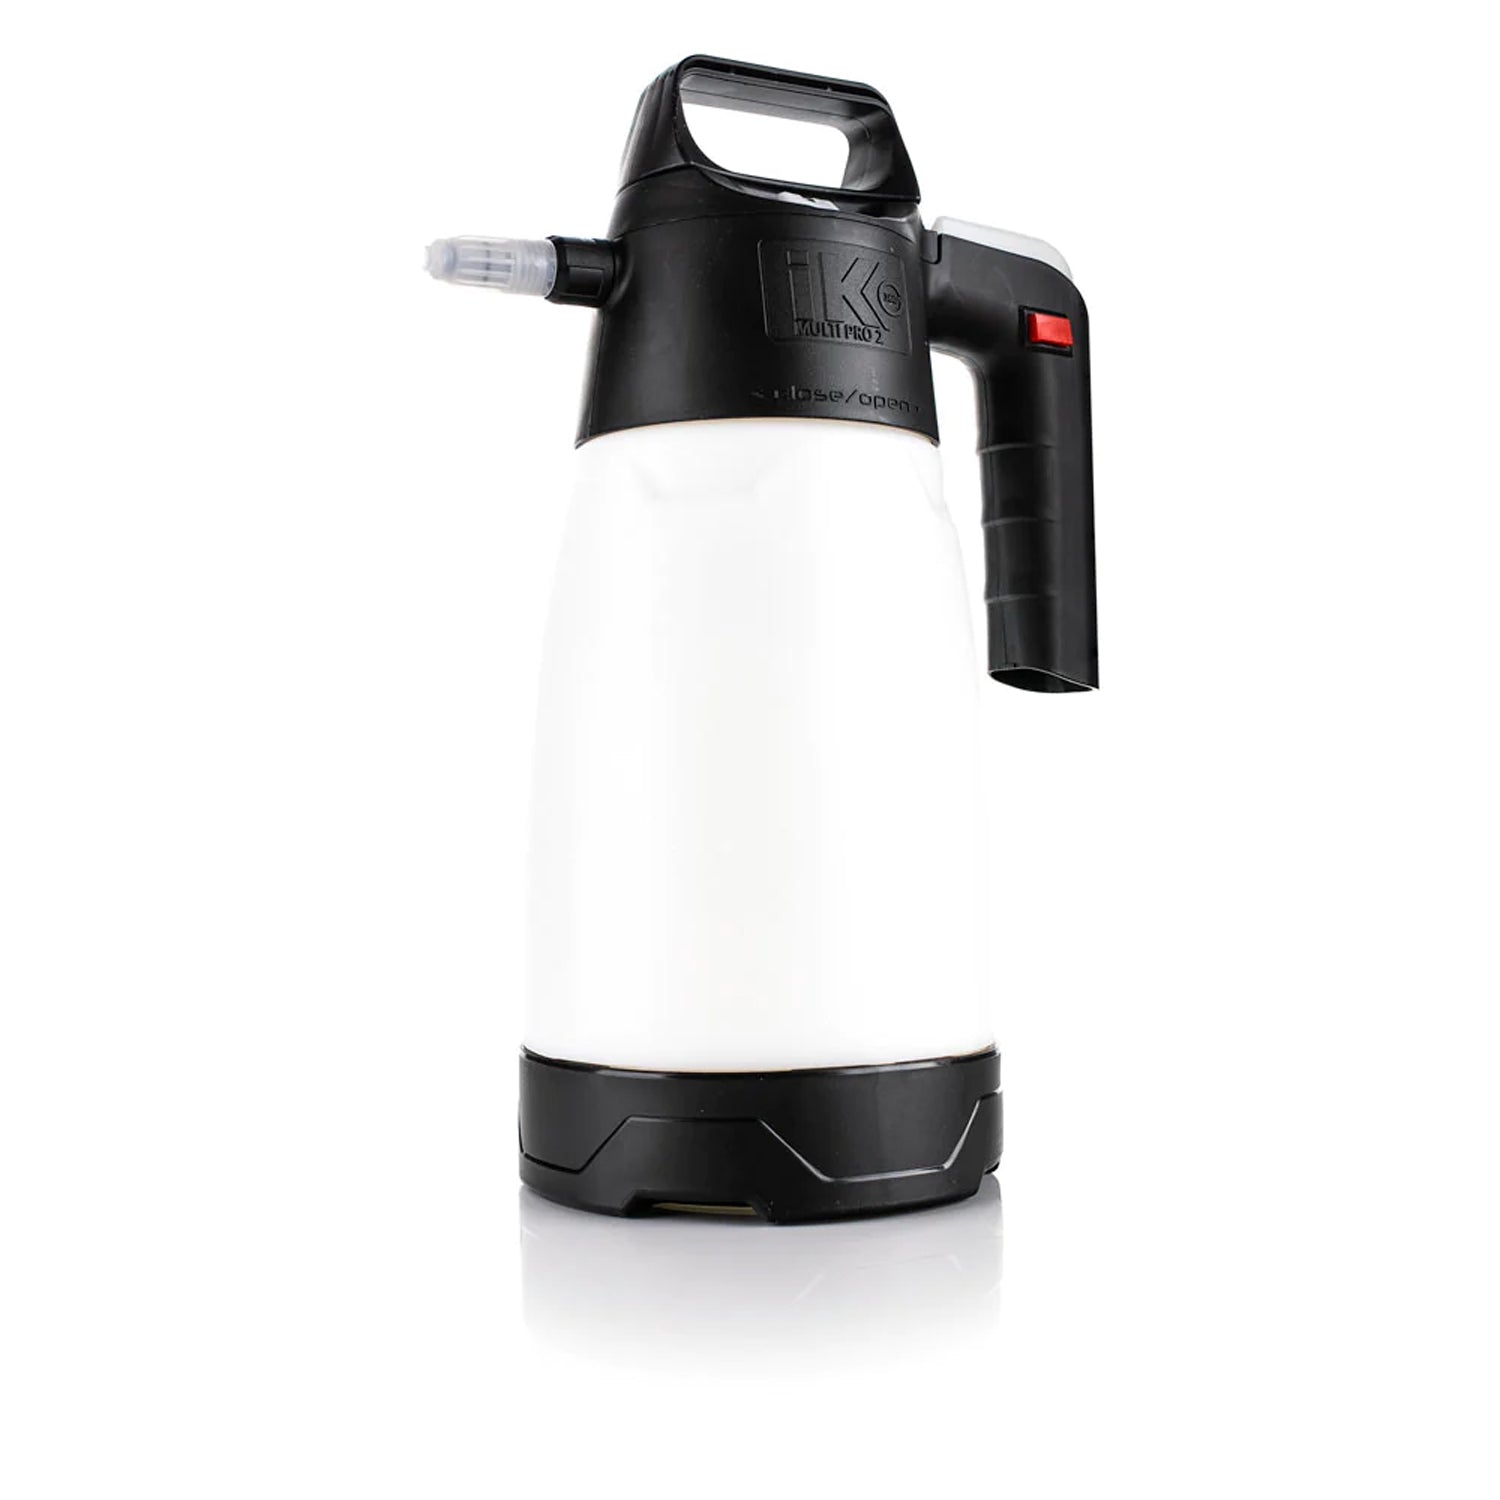 Goizper-IK Sprayers has brought the Game Changer in Foam Sprayers to the  Market! – Mobile Tech Digest